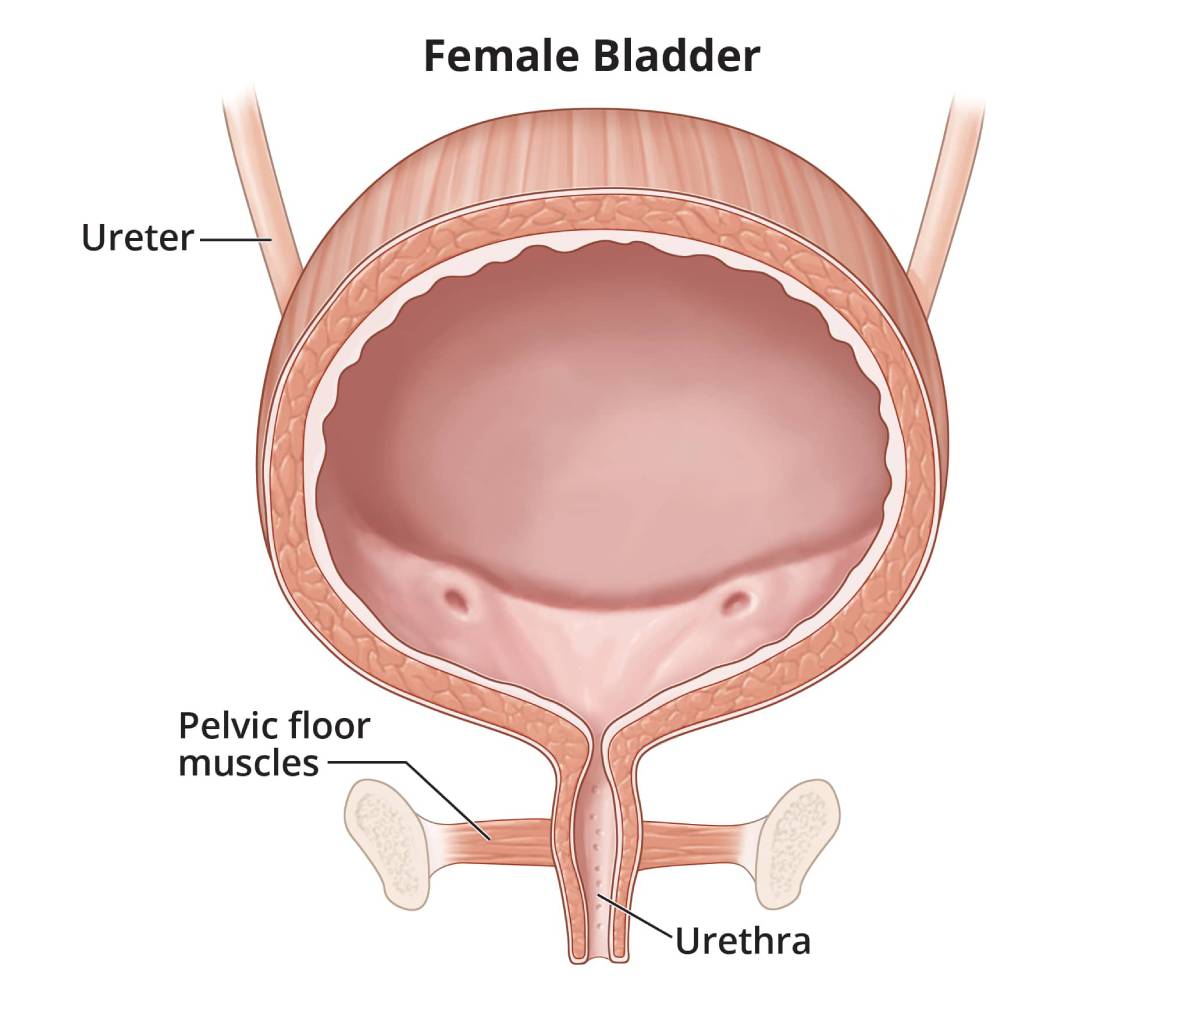 Factors associated with urinary retention after vaginal delivery